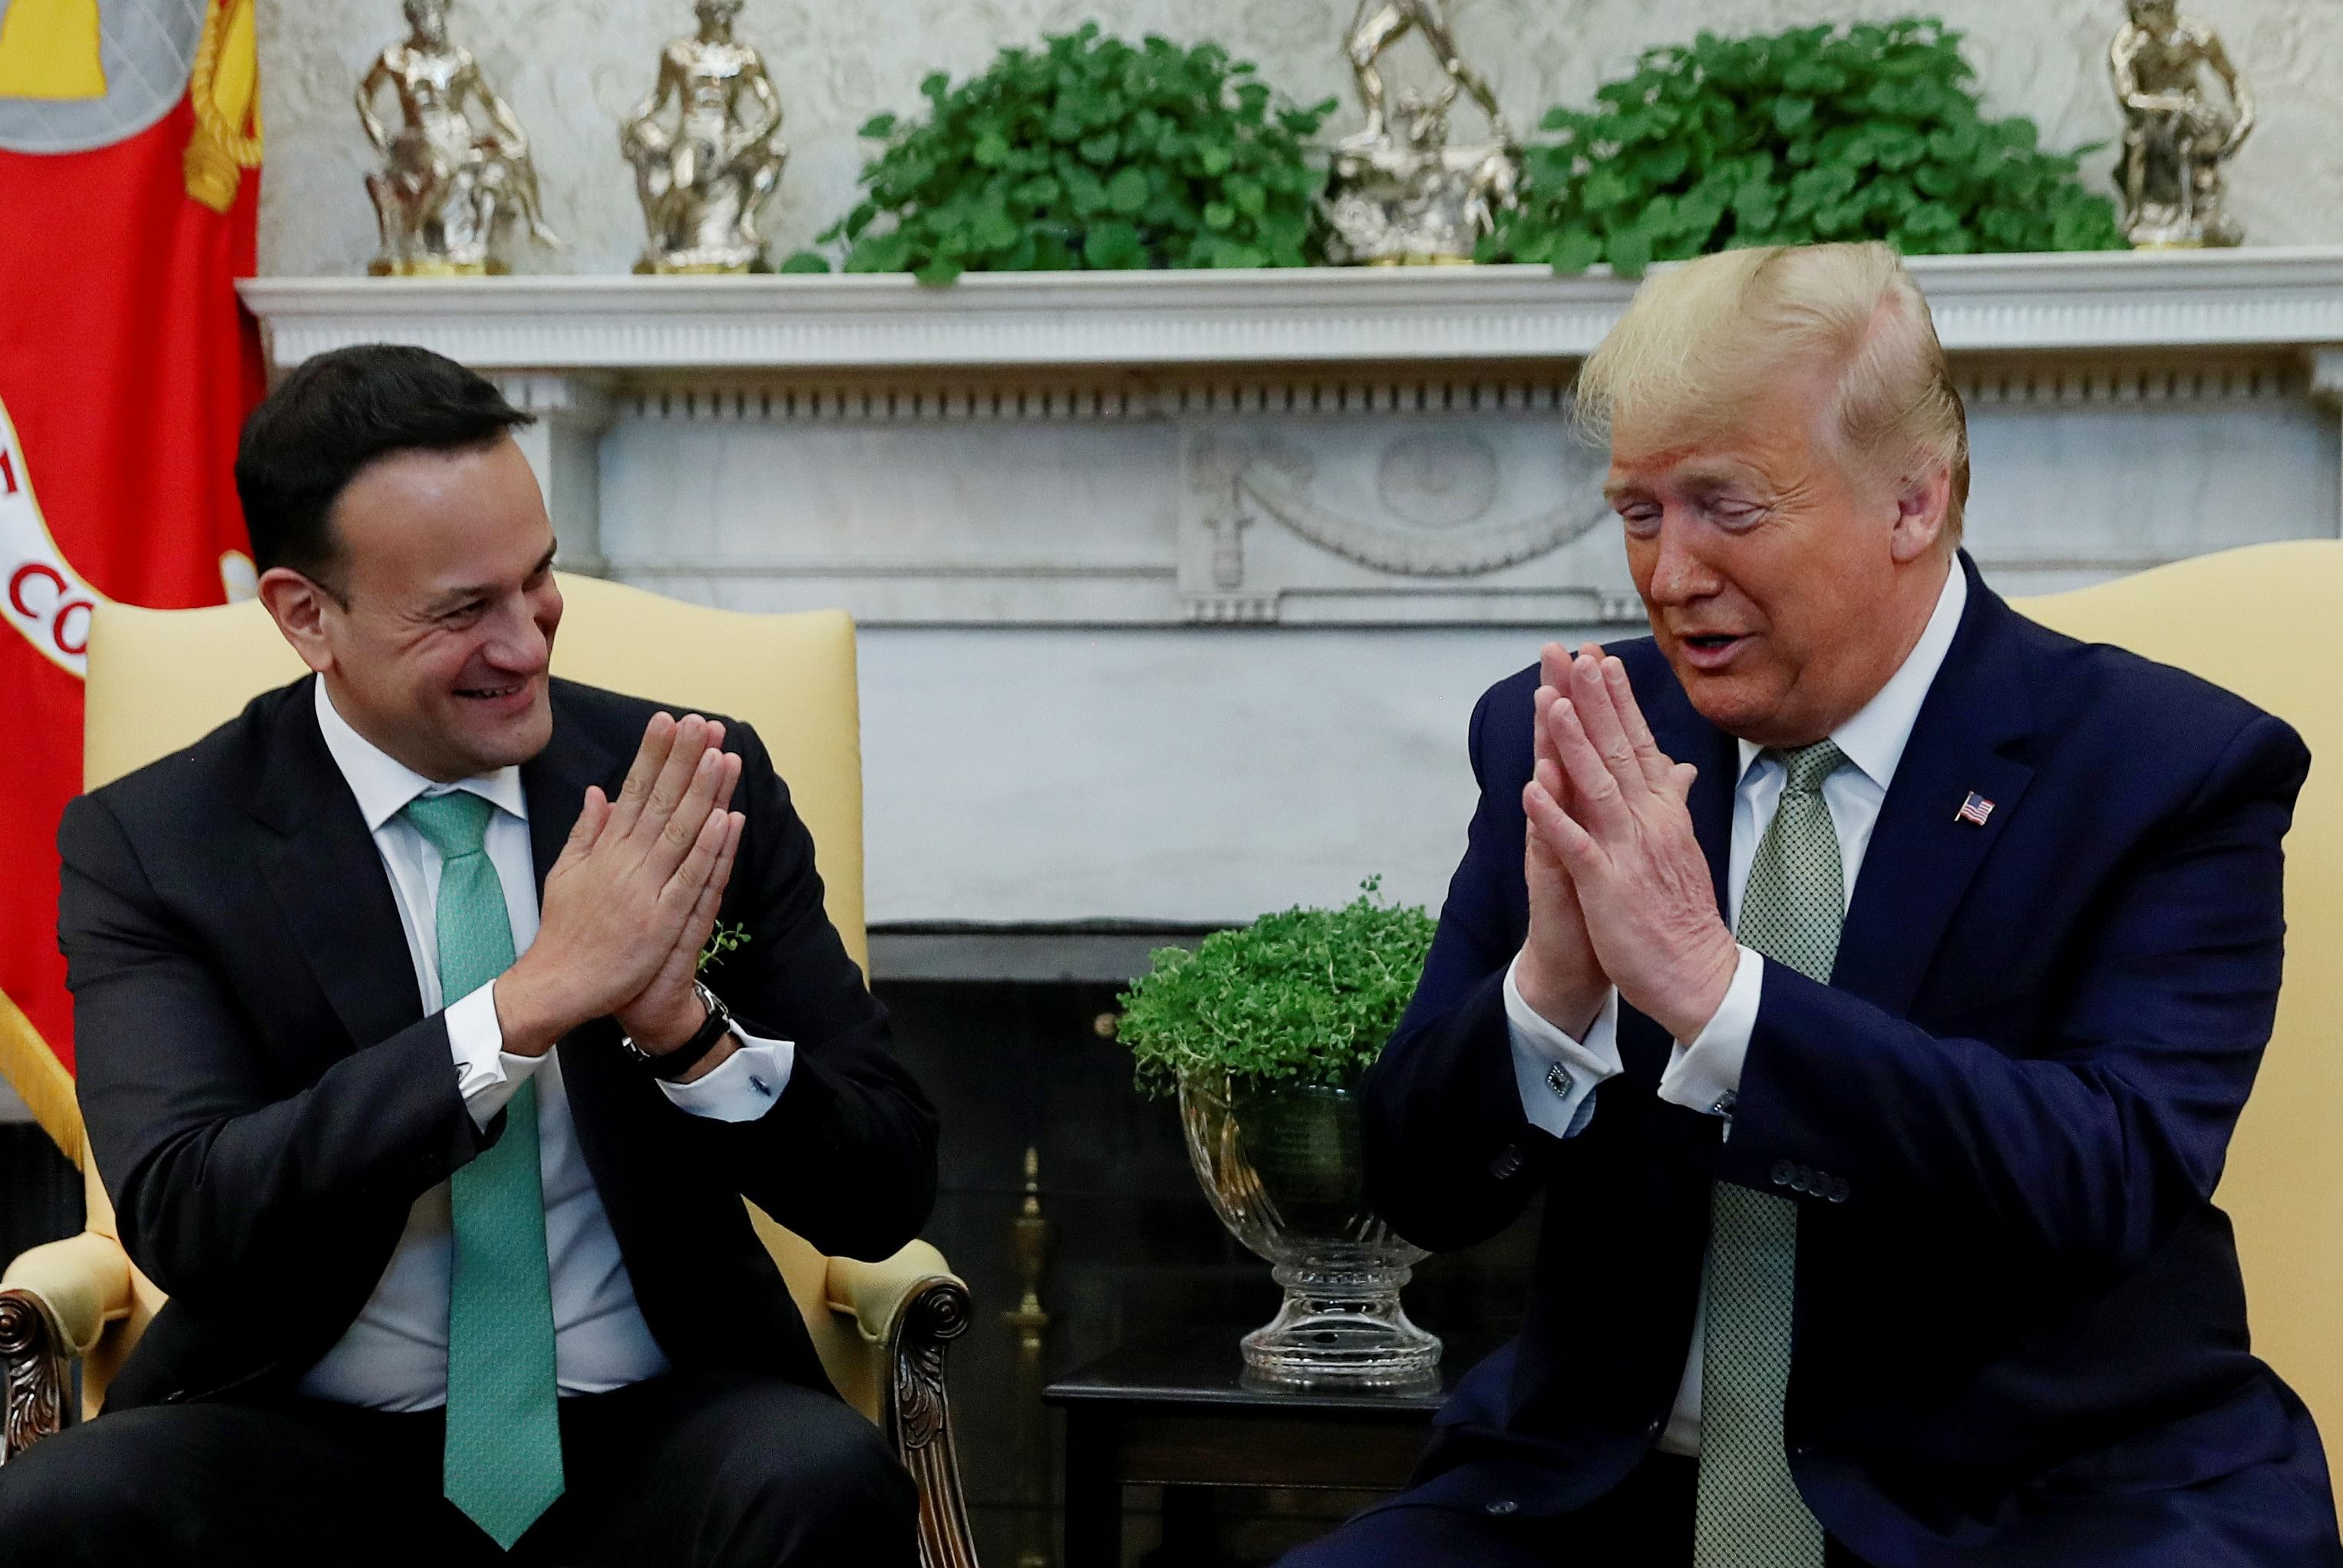 U.S. President Donald Trump meets with Ireland's Prime Minister, Taoiseach Leo Varadkar in the Oval Office of the White House in Washington. (Credit: Reuters)